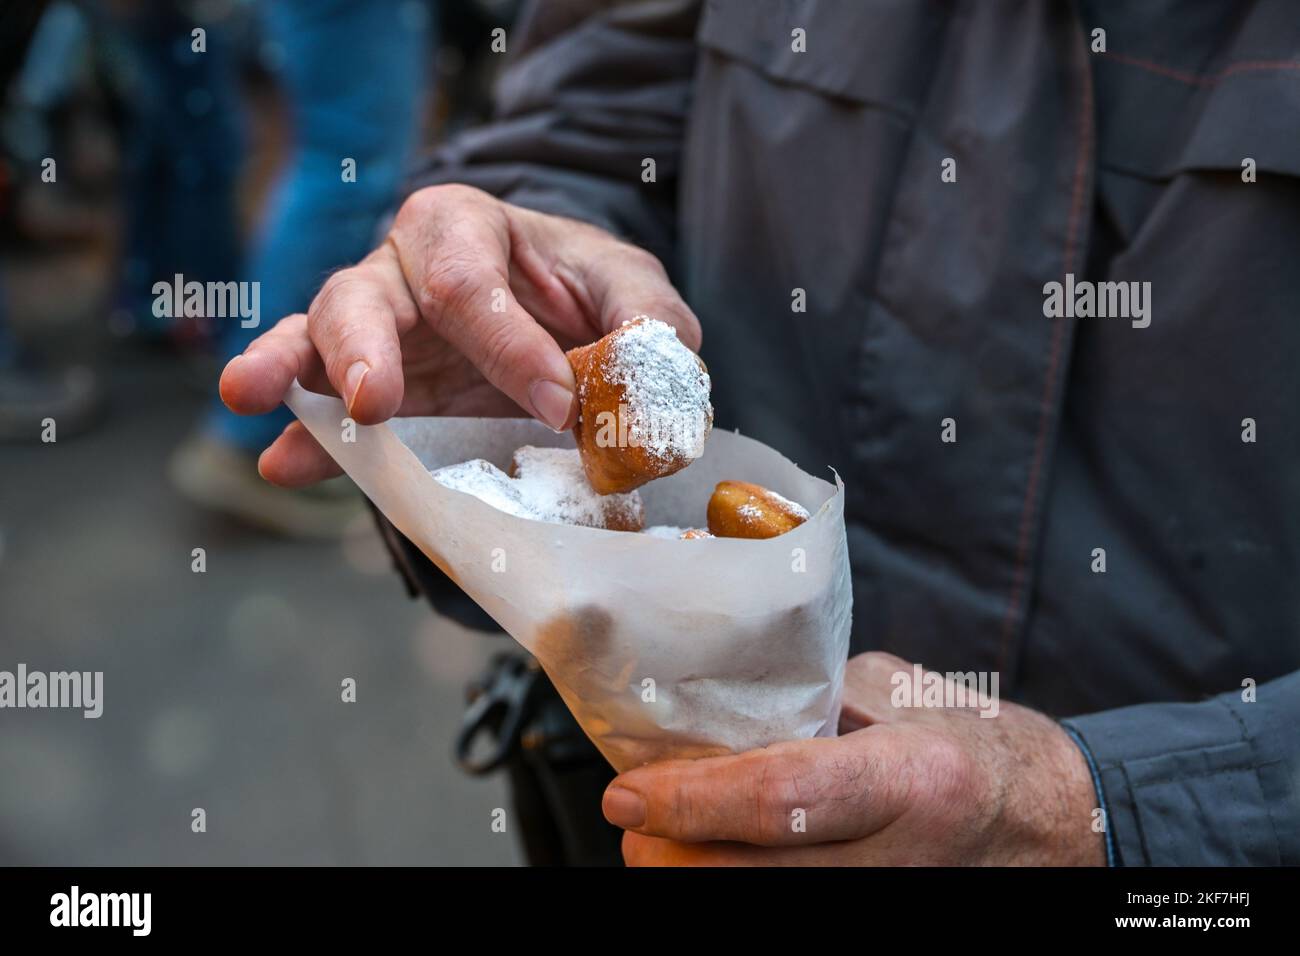 Hands of a man with a paper bag of Mutzenmandeln, deep fried sweet pastry with almonds covered with powdered sugar, traditional German fair snack on C Stock Photo